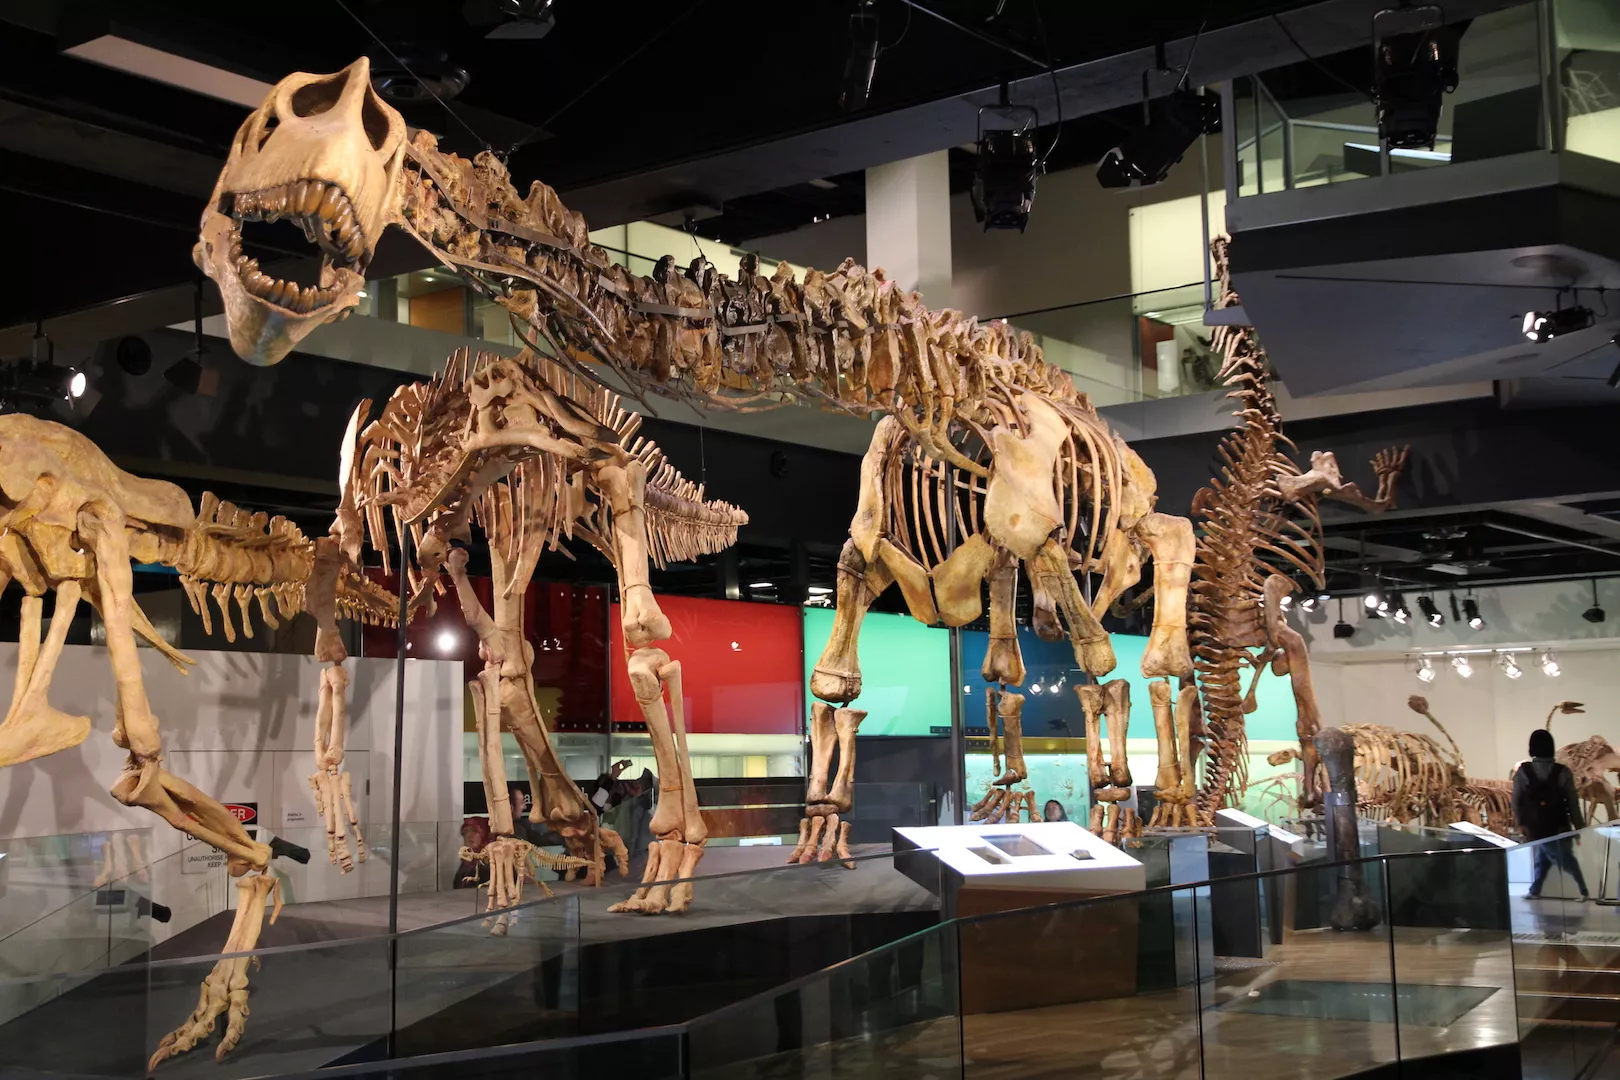 Melbourne Museum in Australia, Australia and Oceania | Museums - Rated 4